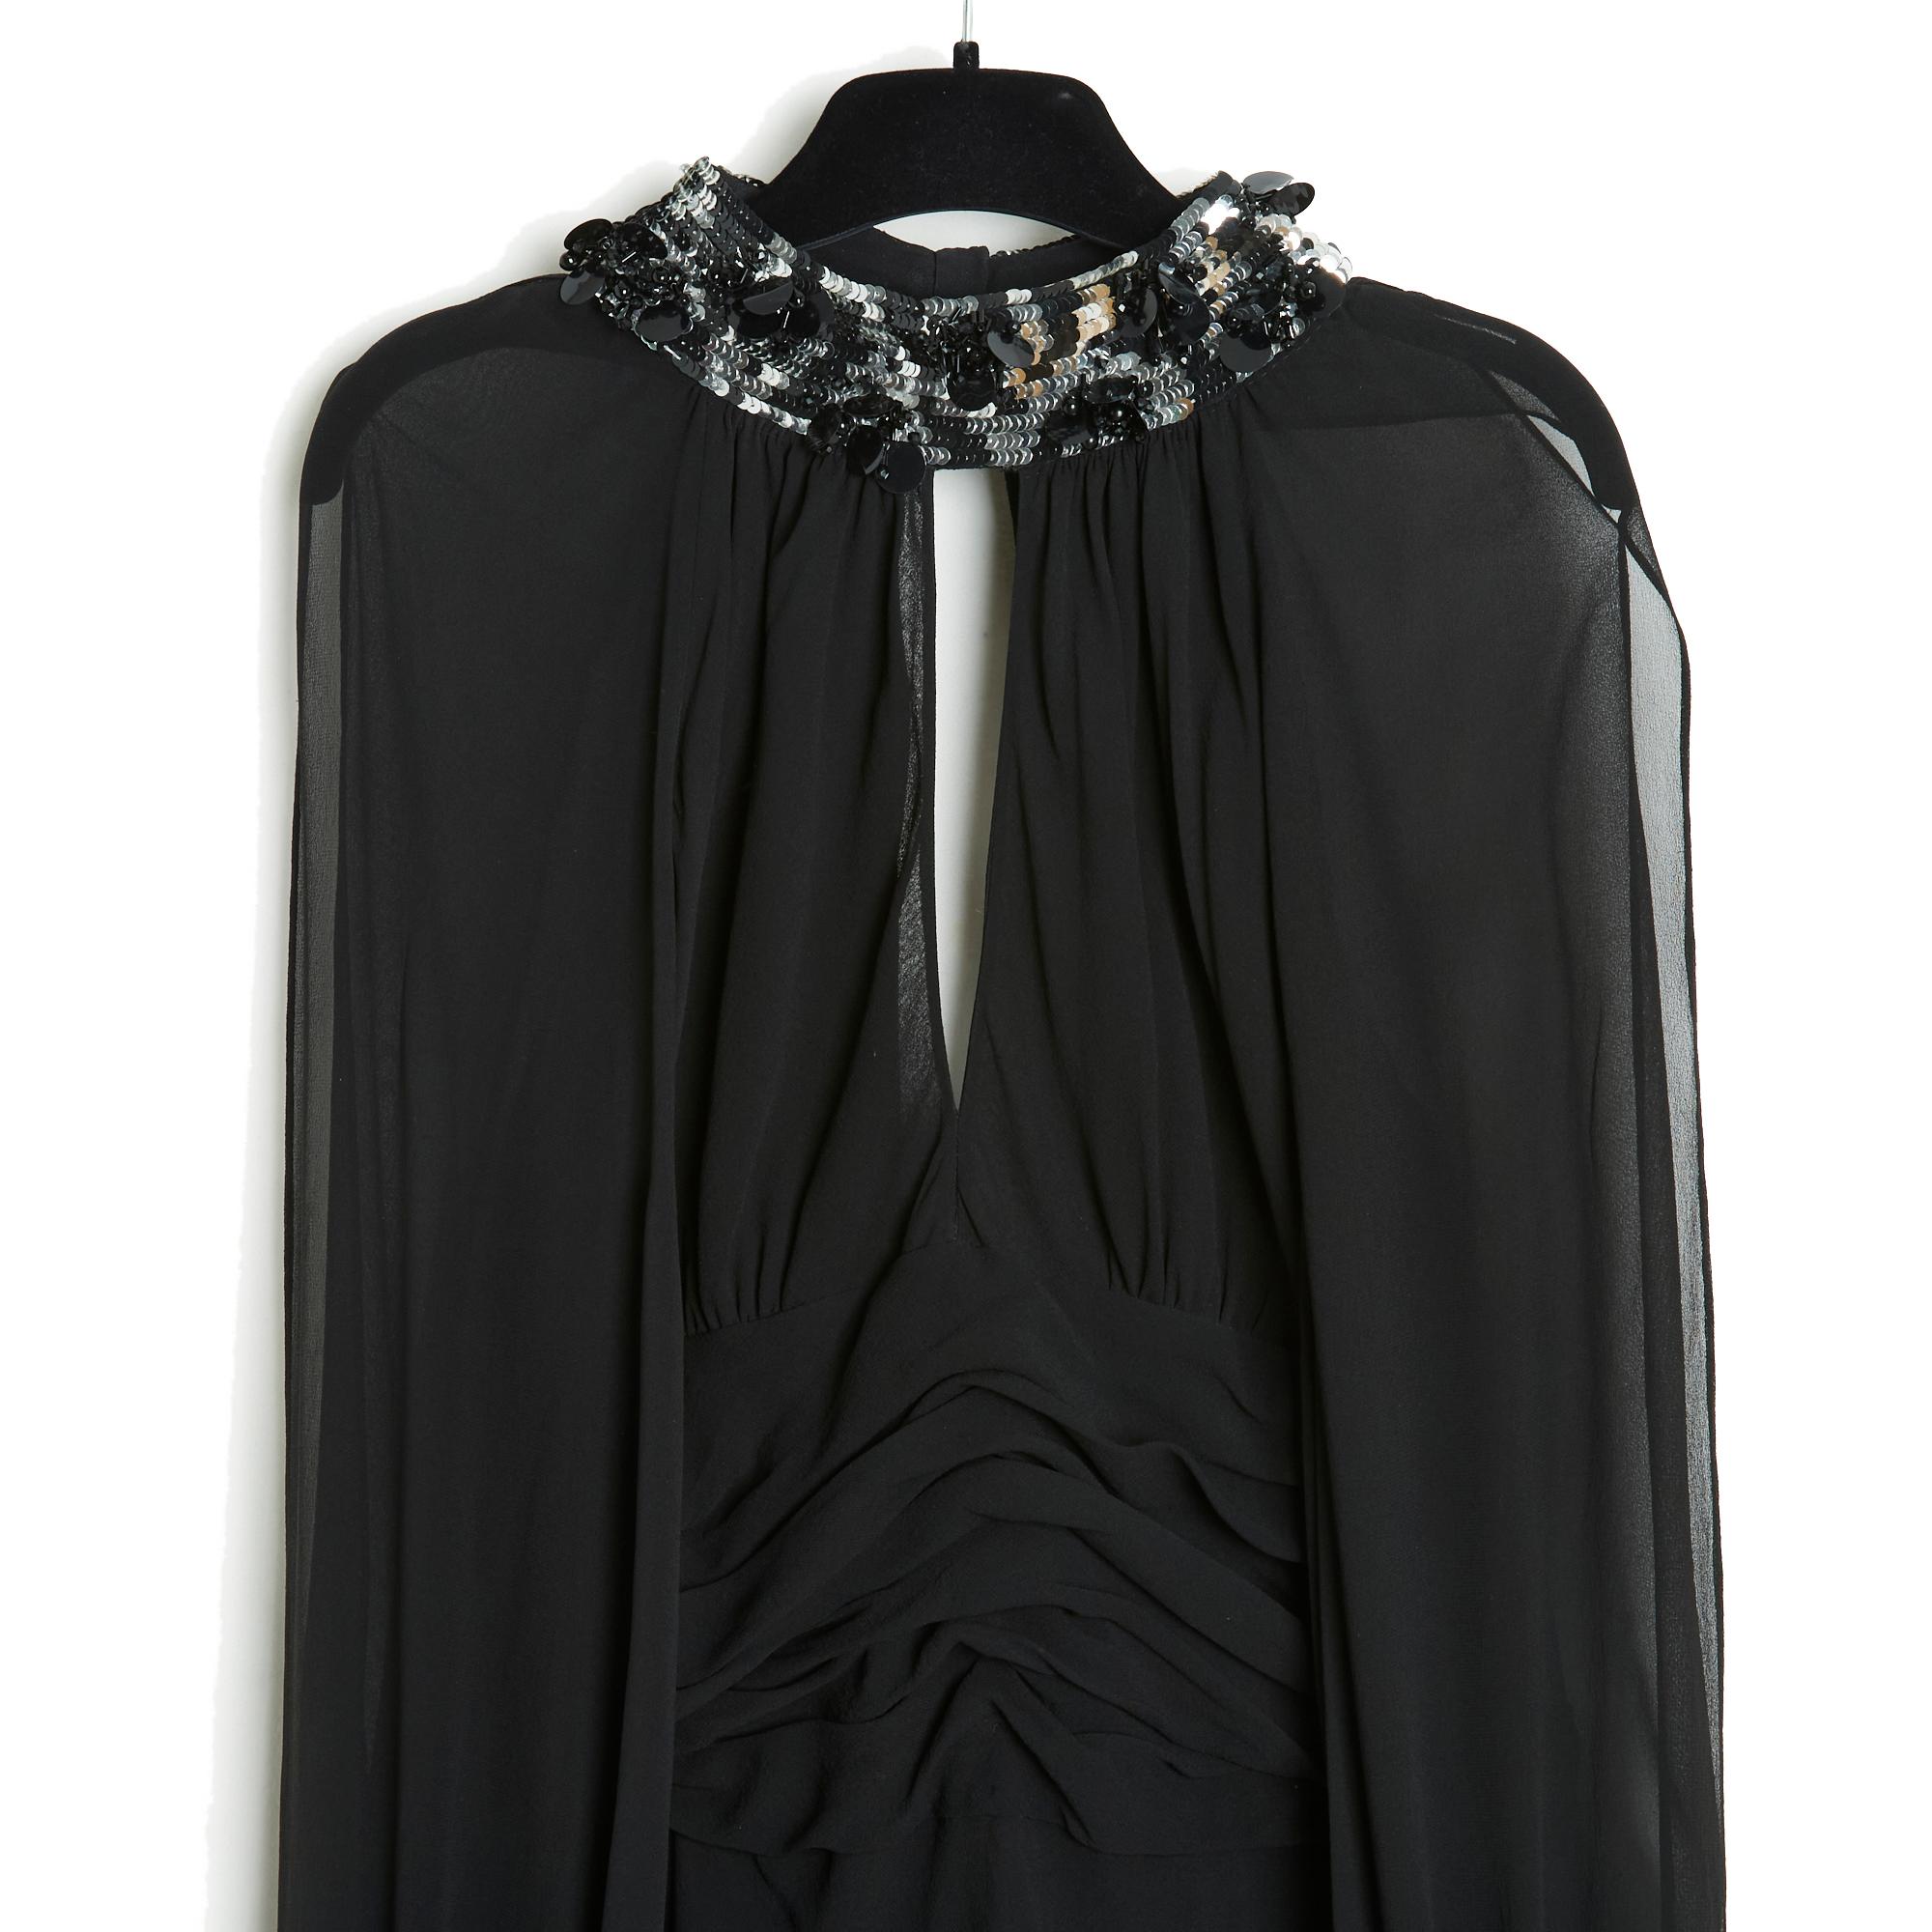 Jean Louis Scherrer maxi dress in black silk crepe, round neck embroidered with silver and black sequins and pearls, closed with 3 covered buttons at the back, pointed neckline at the front and back (a little deeper), long, slightly puffed sleeves,